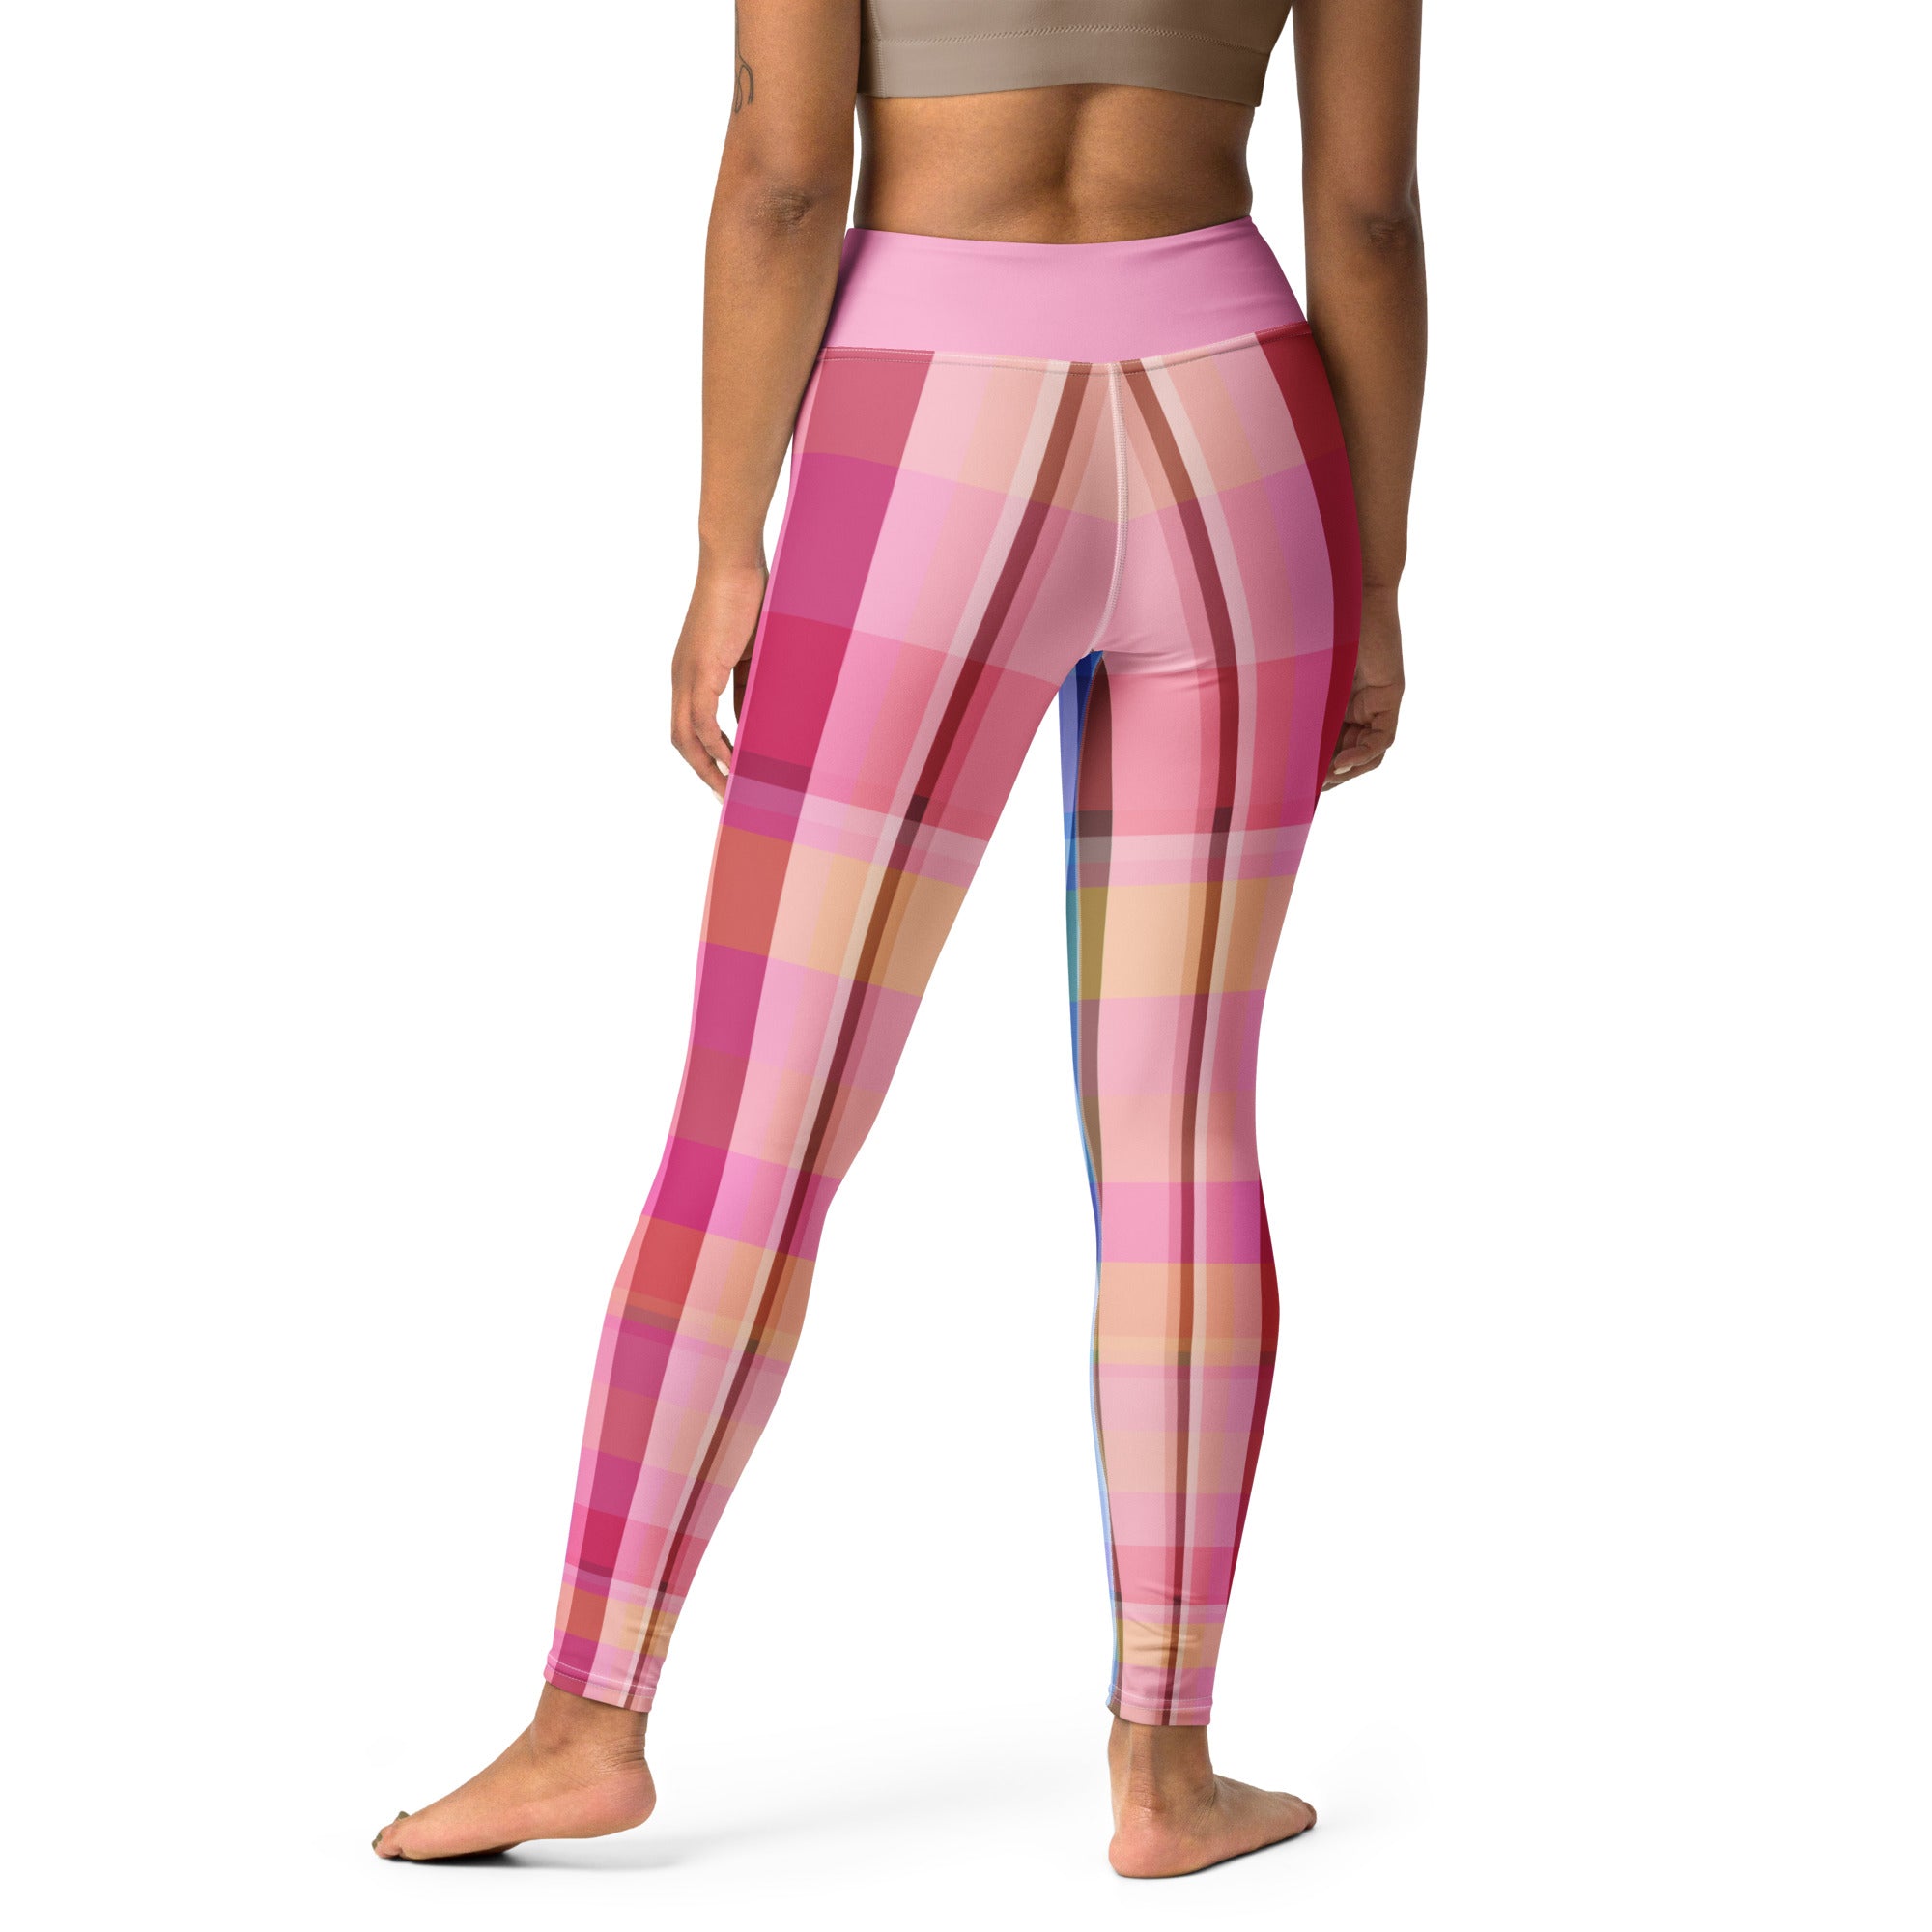 Color-rich leggings featuring a unique kaleidoscope pattern, blending style and flexibility for your practice.